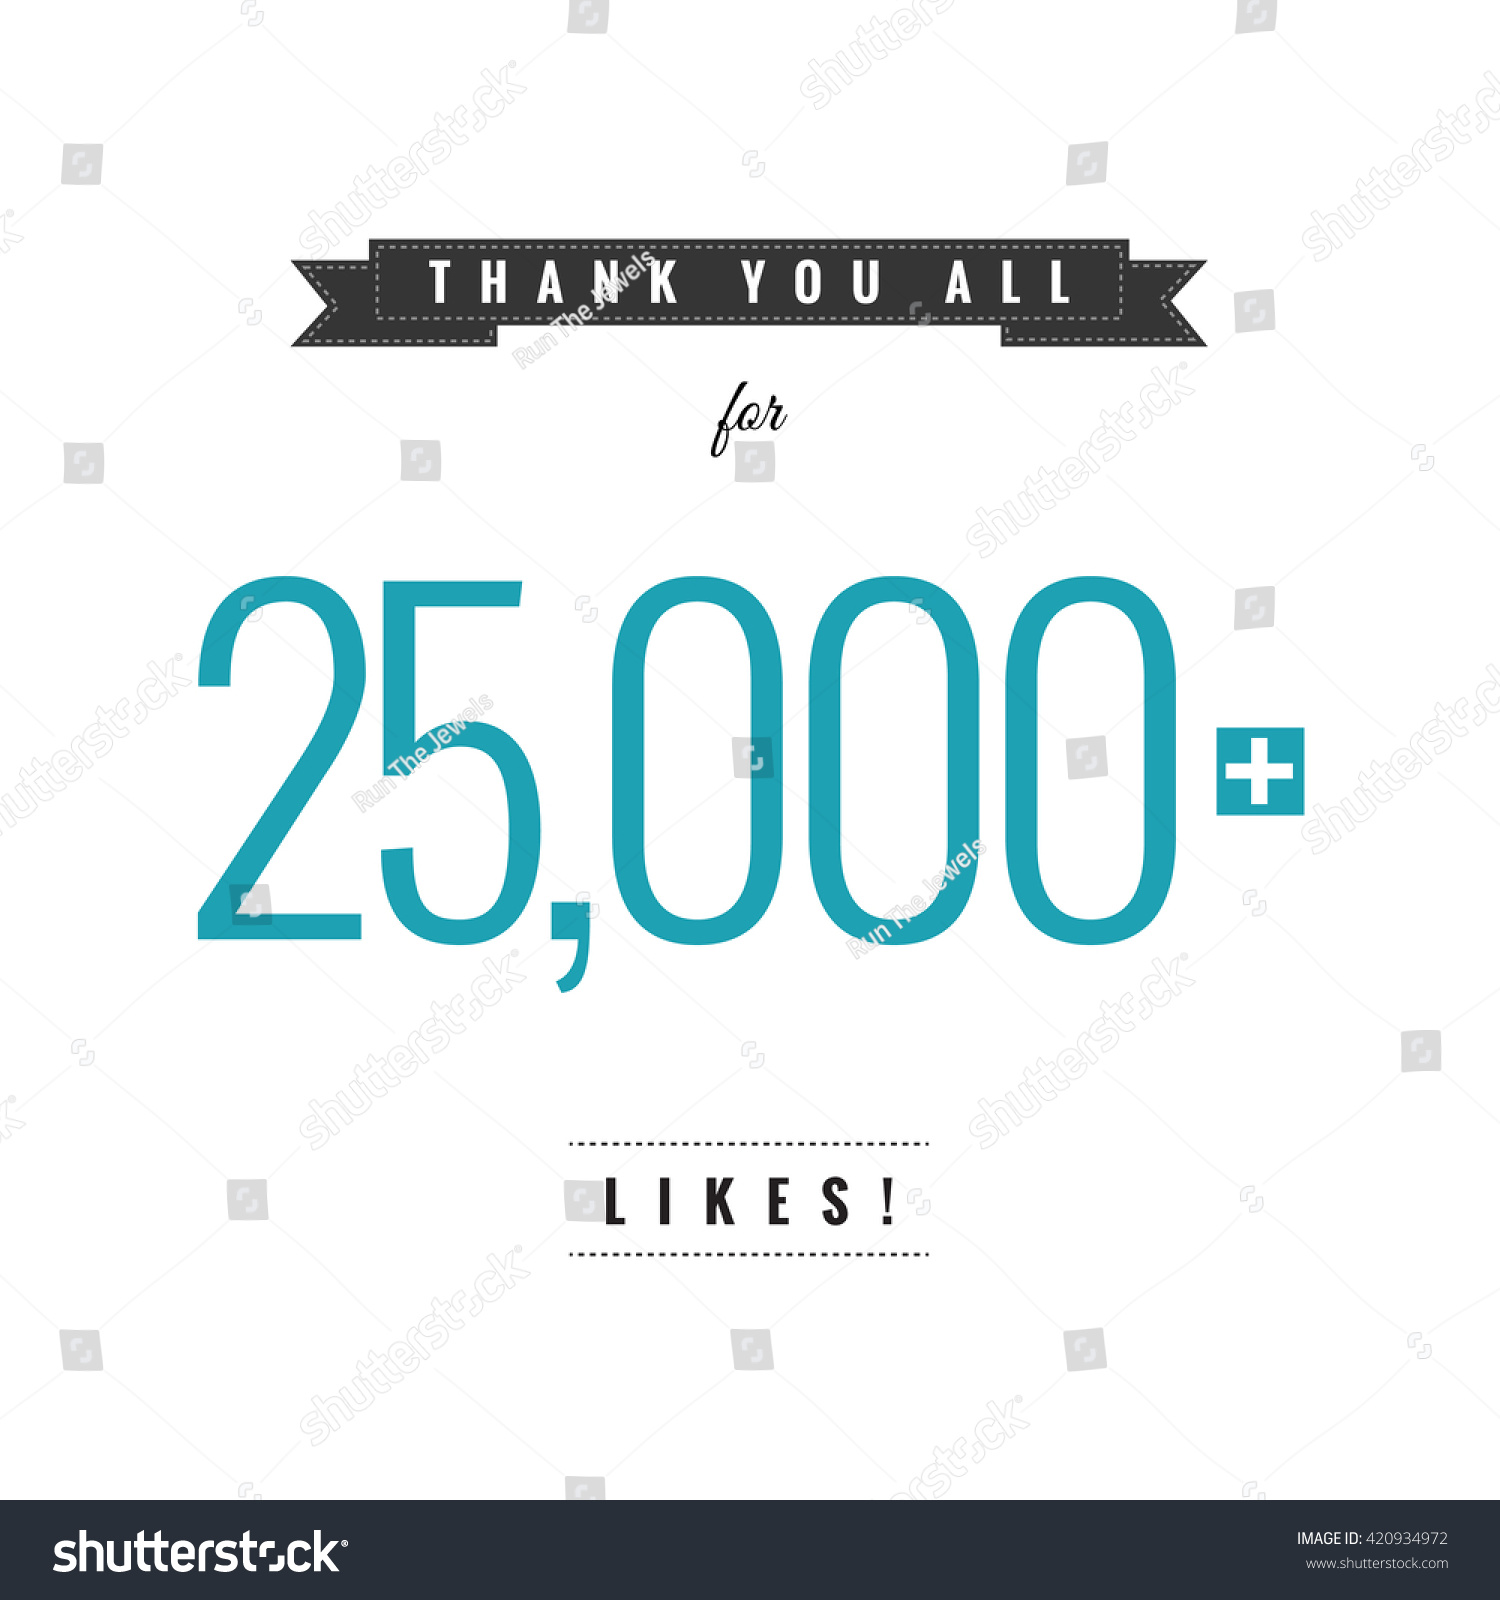 SVG of Thank You All For 25,000 Likes (Vector Design Template) svg